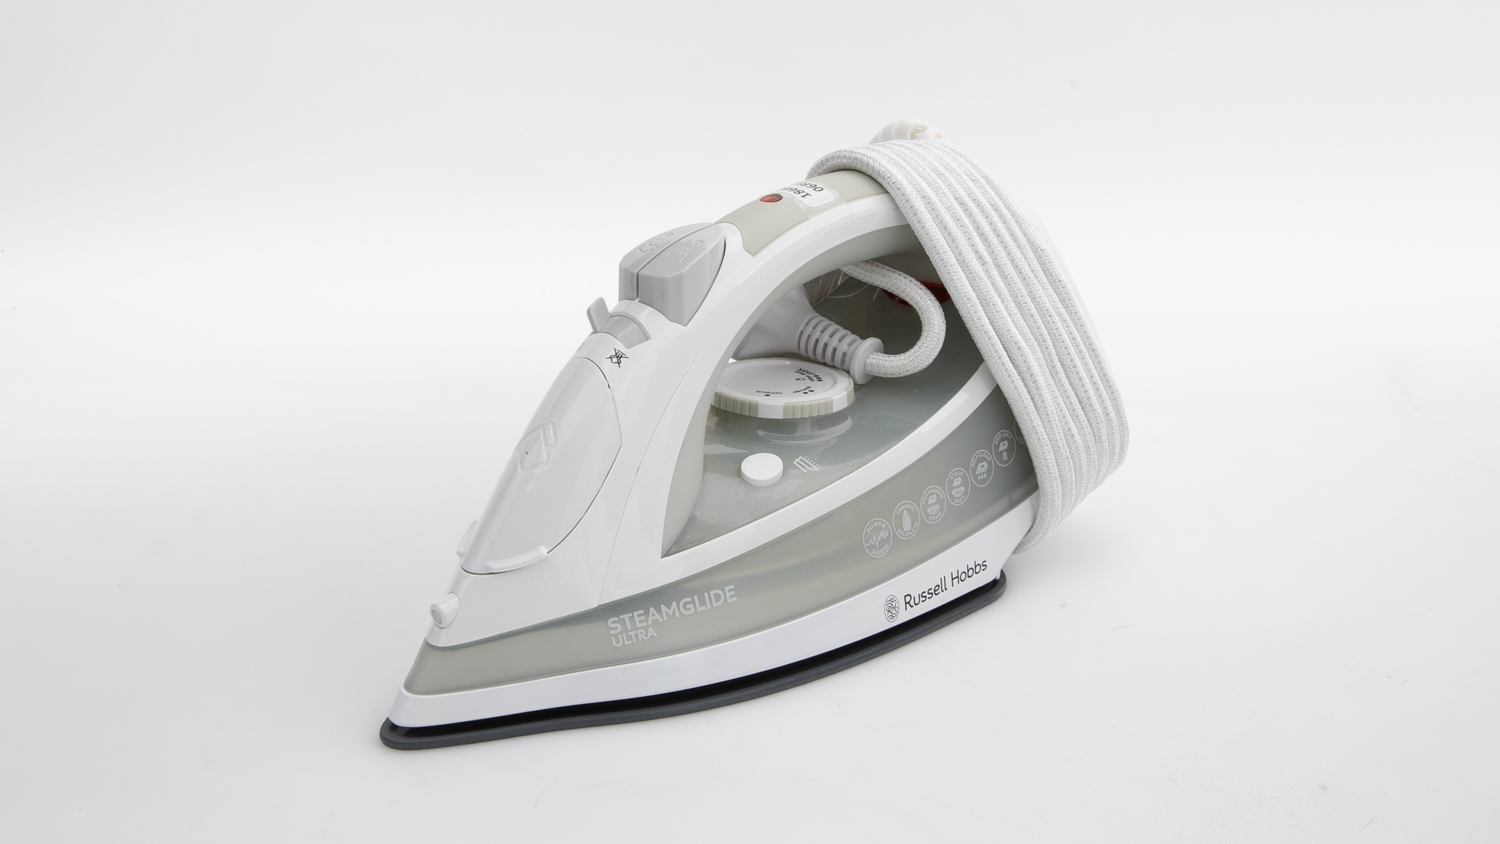 Russell Hobbs Steamglide Ultra RHC940 carousel image